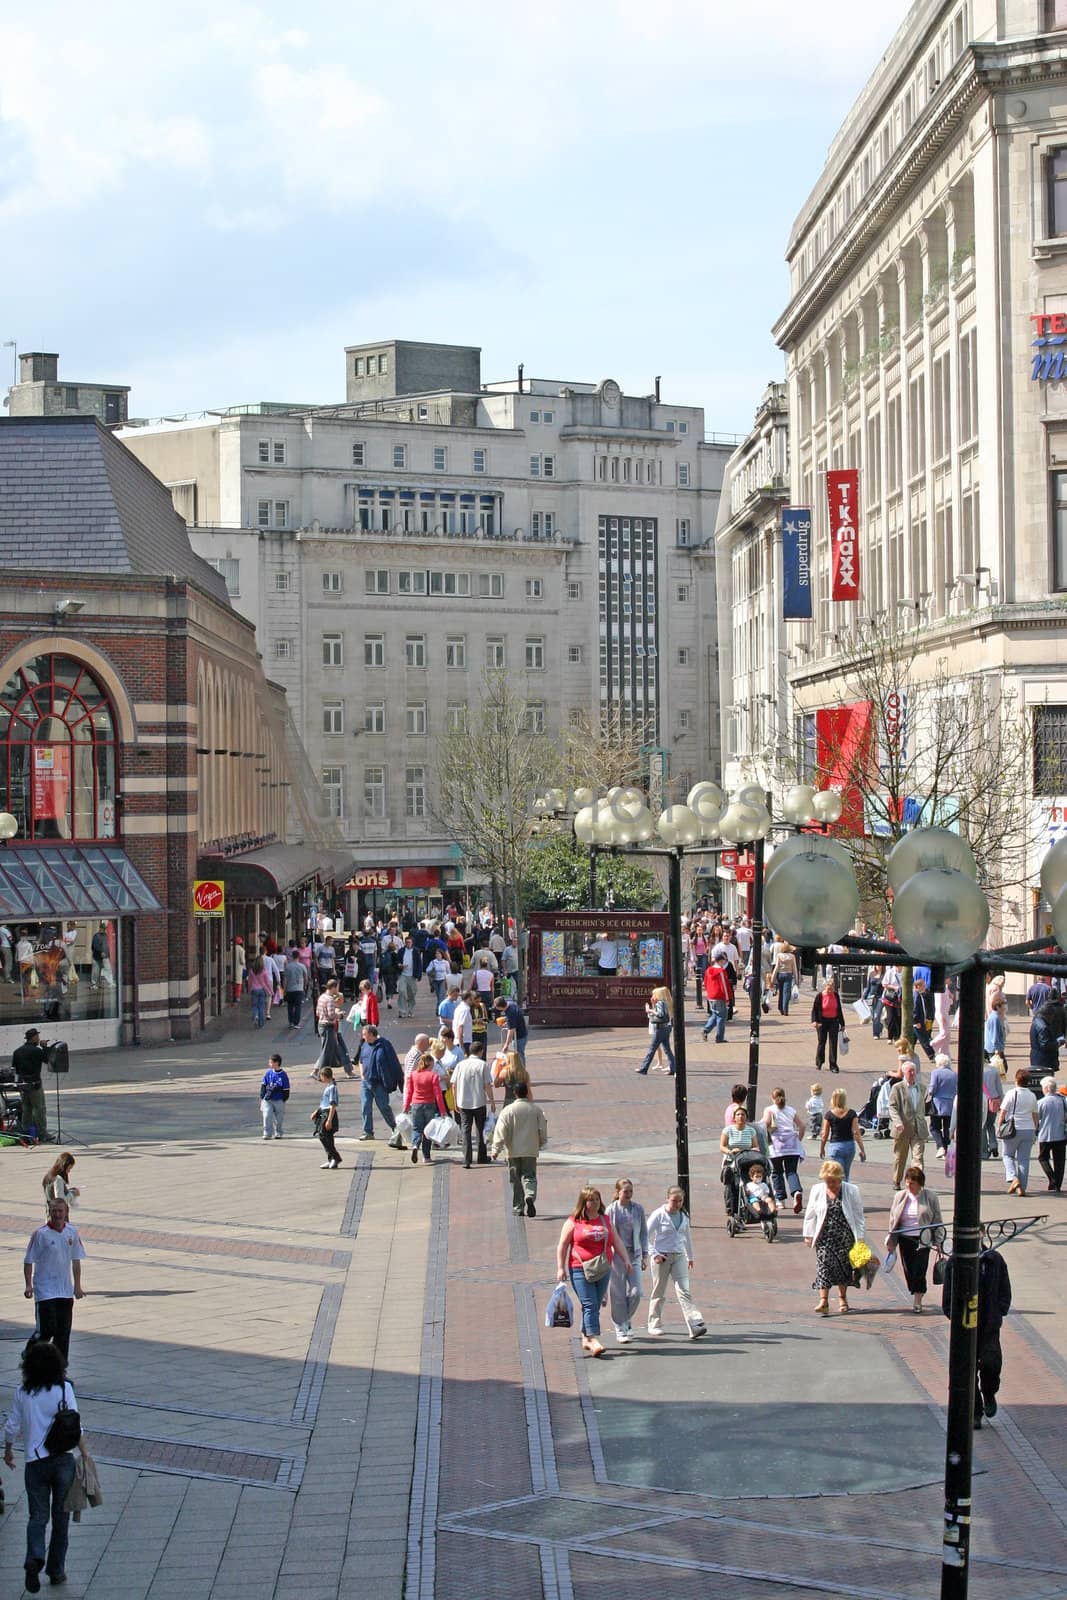 Shoppers in Liverpool by green308